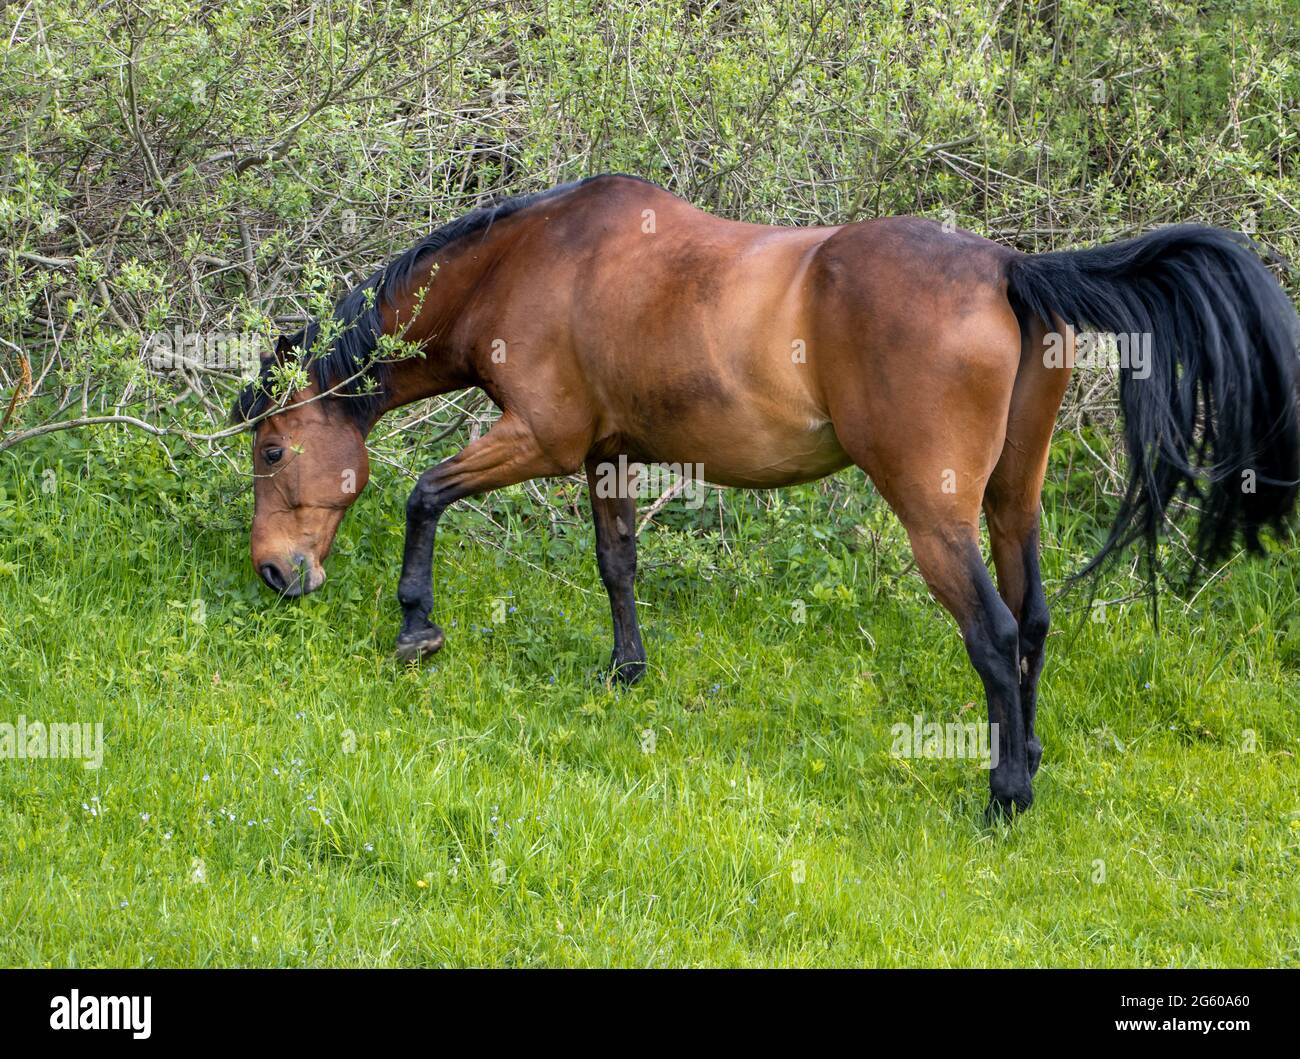 Thoroughbred horse grazes on a green field. Stock Photo